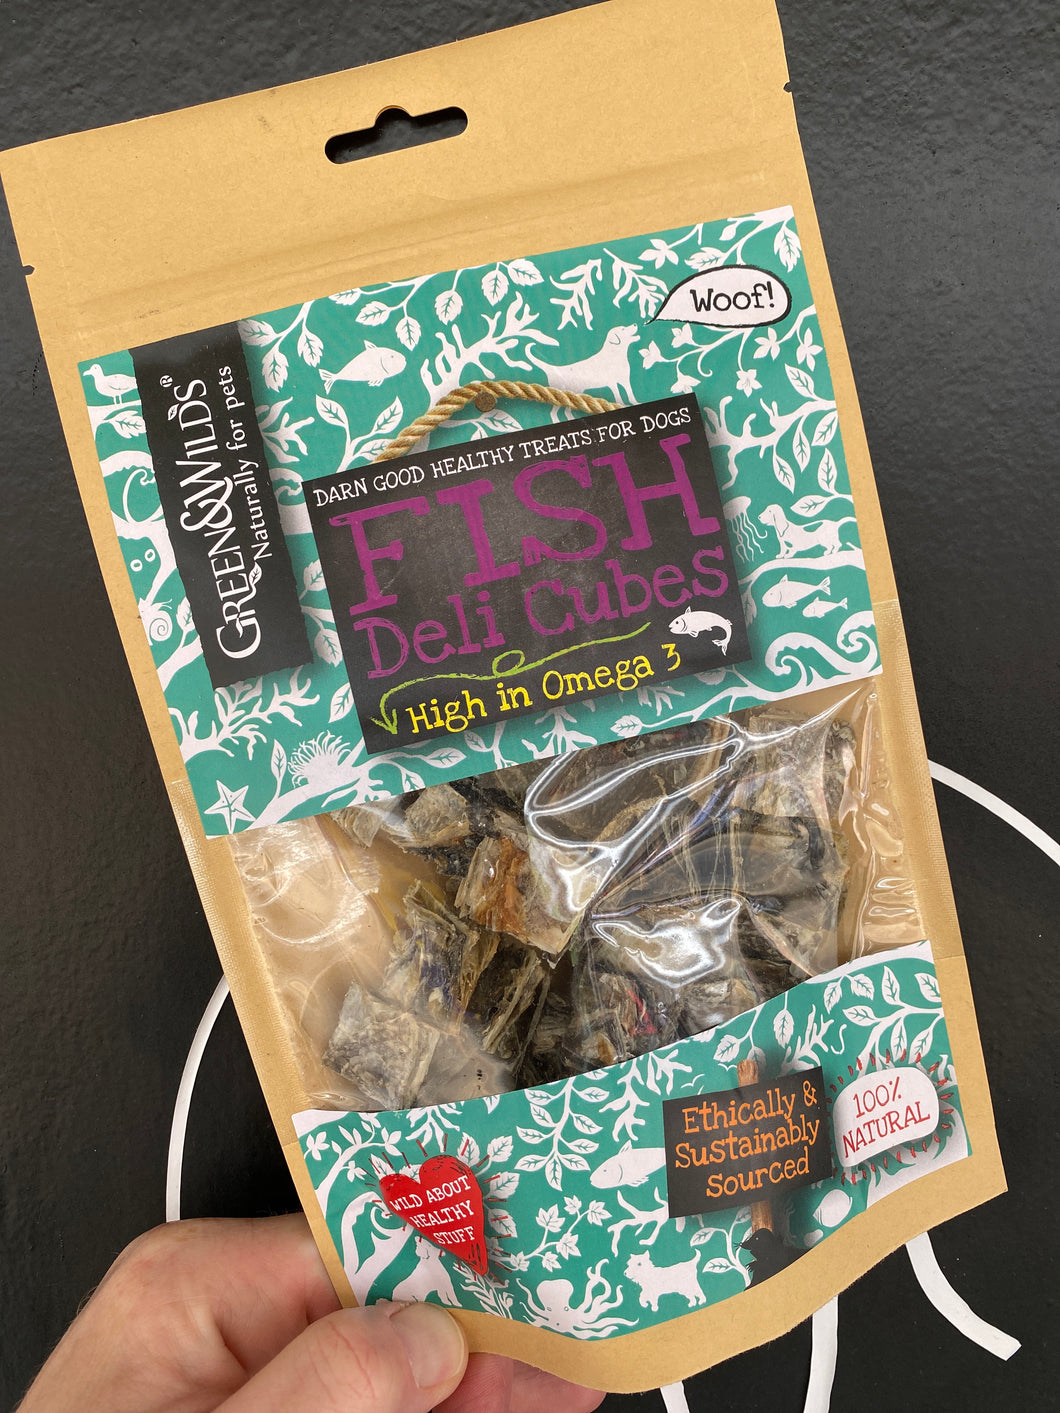 Fish deli cubes from Green & Wilds